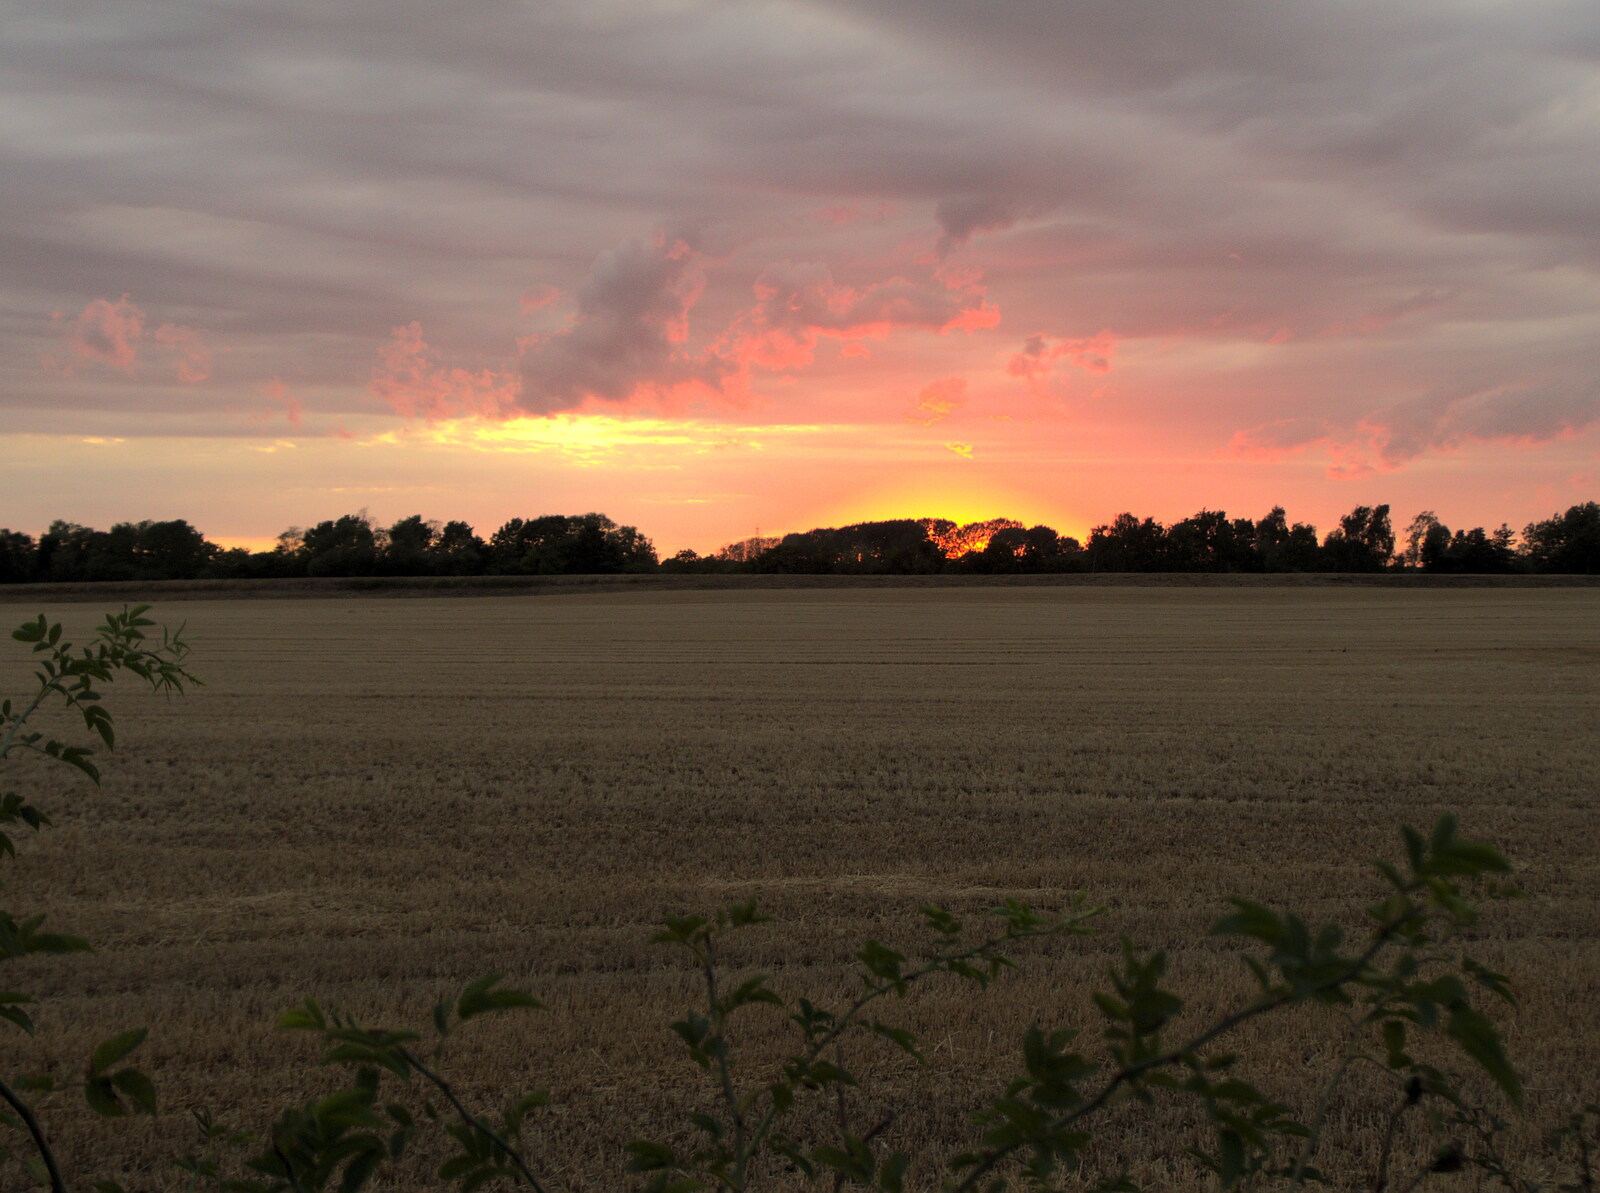 There's an interesting sunset near Dickleburgh from The BSCC at Pulham and Marc's Birthday at Ampersand Tap, Diss, Norfolk - 6th August 2022